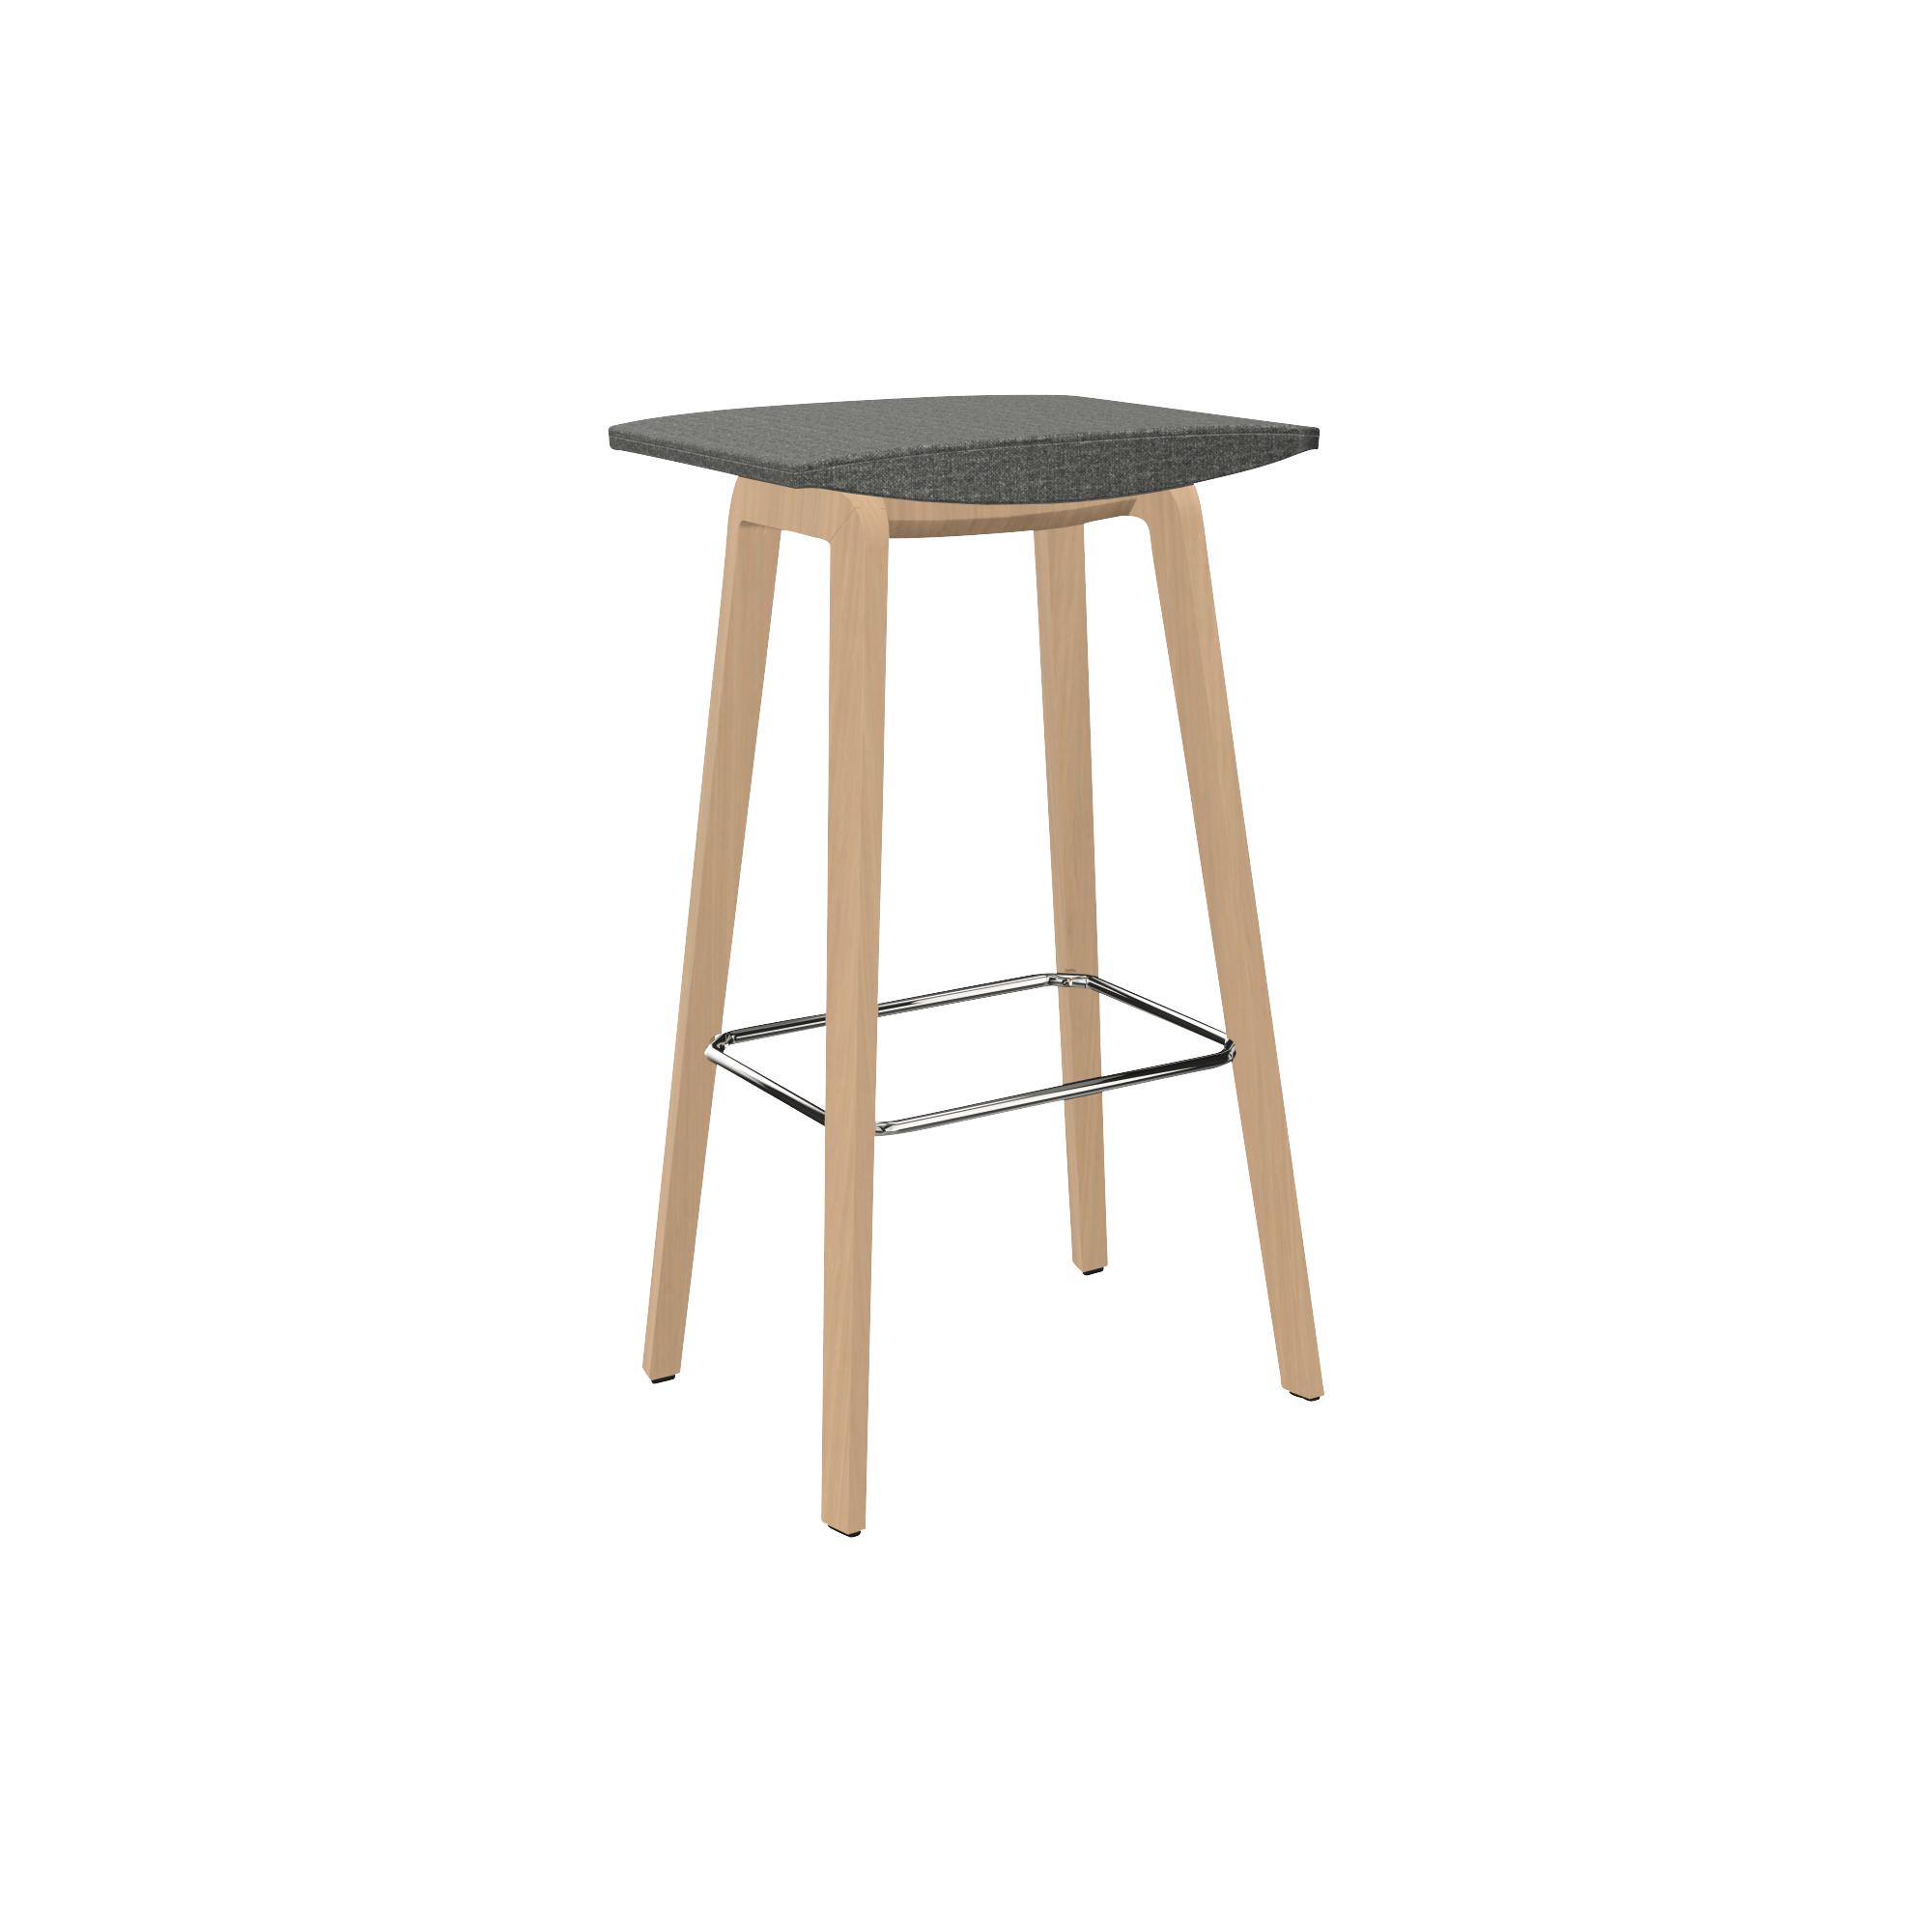 tall stool with wooden legs and grey seat